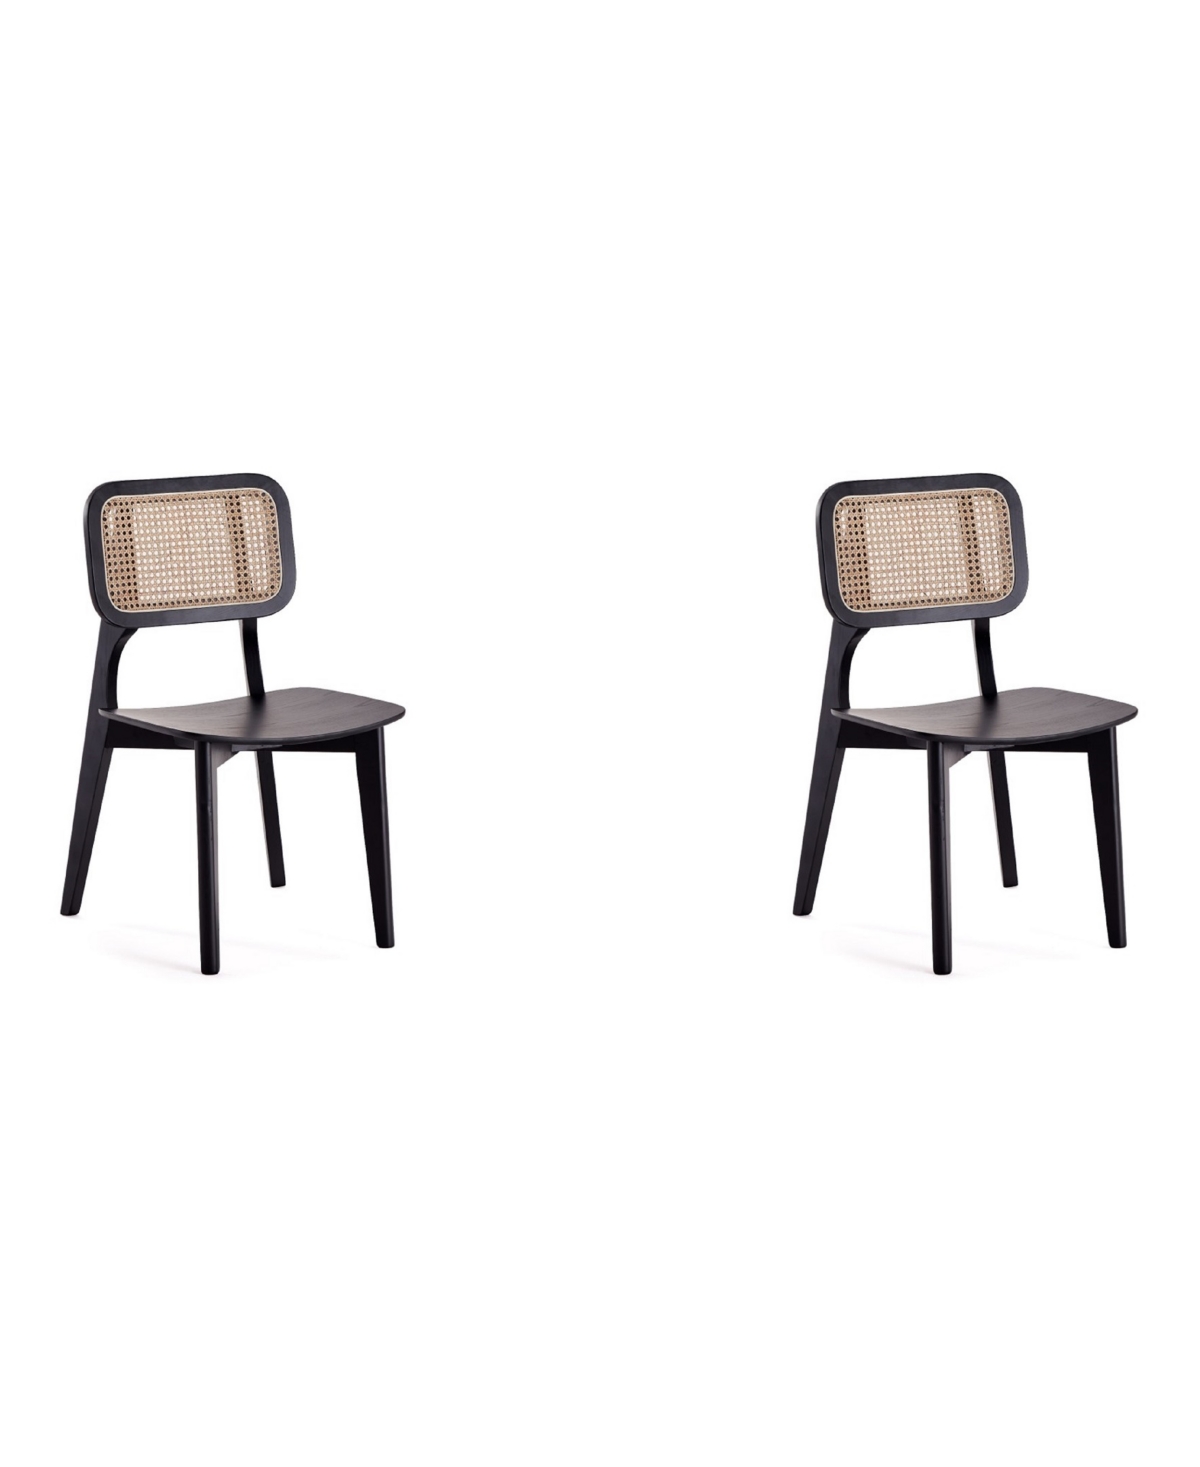 Manhattan Comfort Versailles 2-piece Square Ash Wood And Natural Cane Dining Chair In Black And Natural Cane